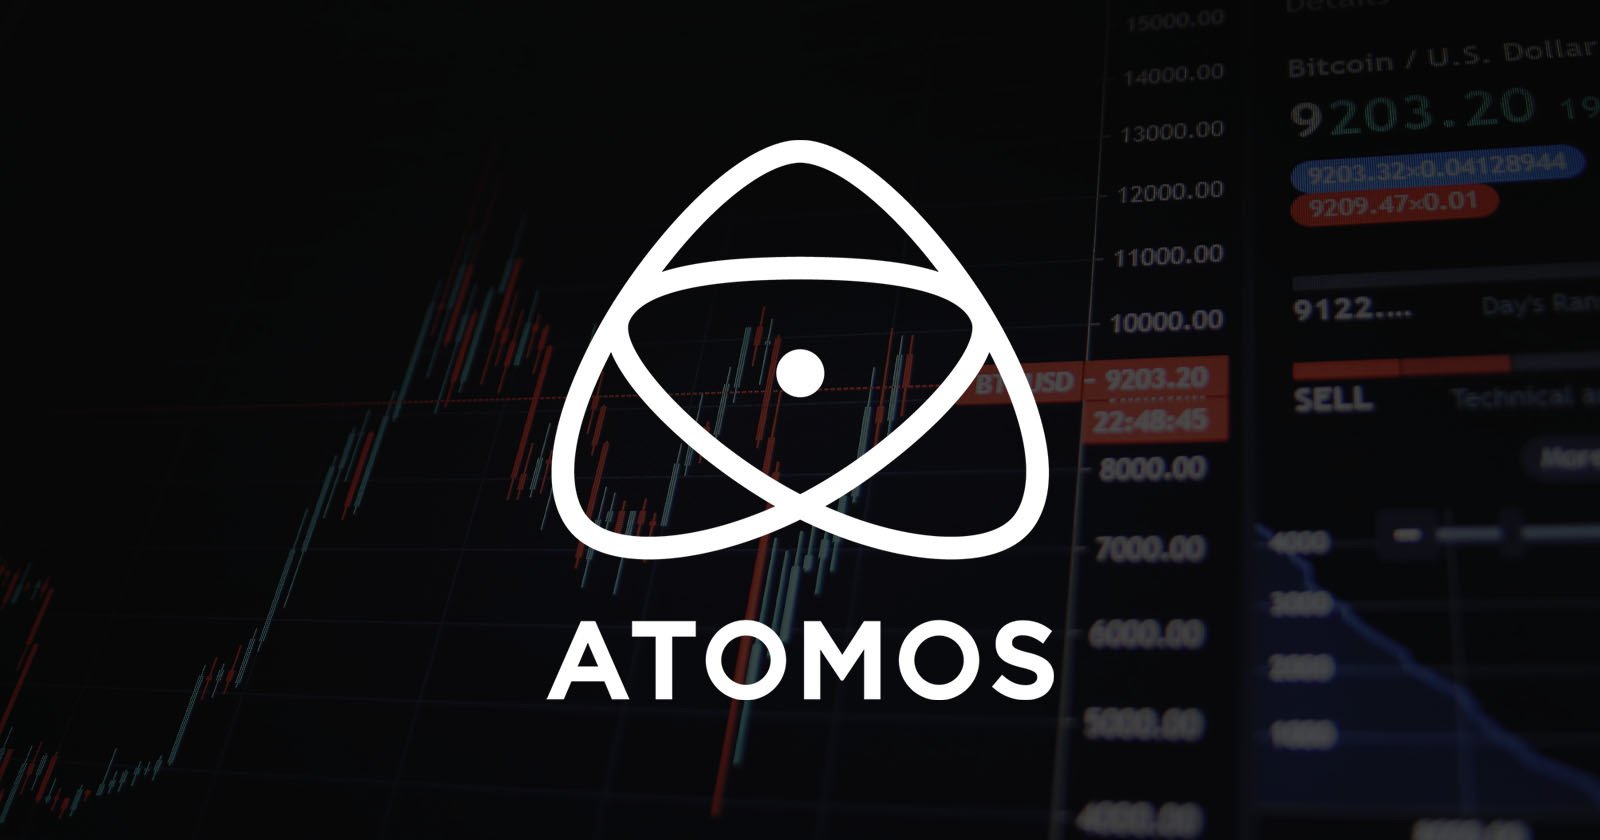  former atomos ceo says she was fired 